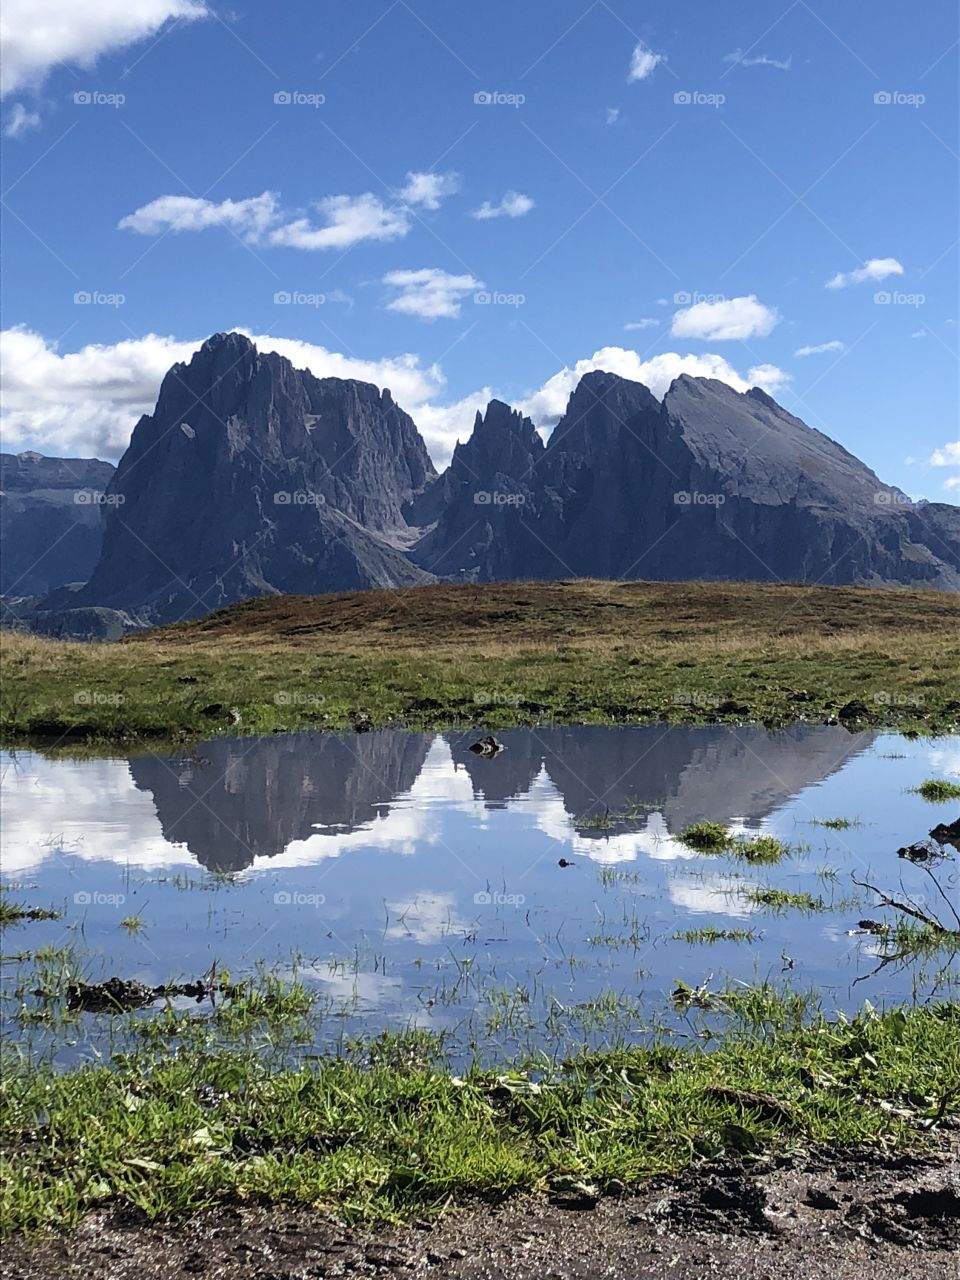 Mountains reflected in a puddle